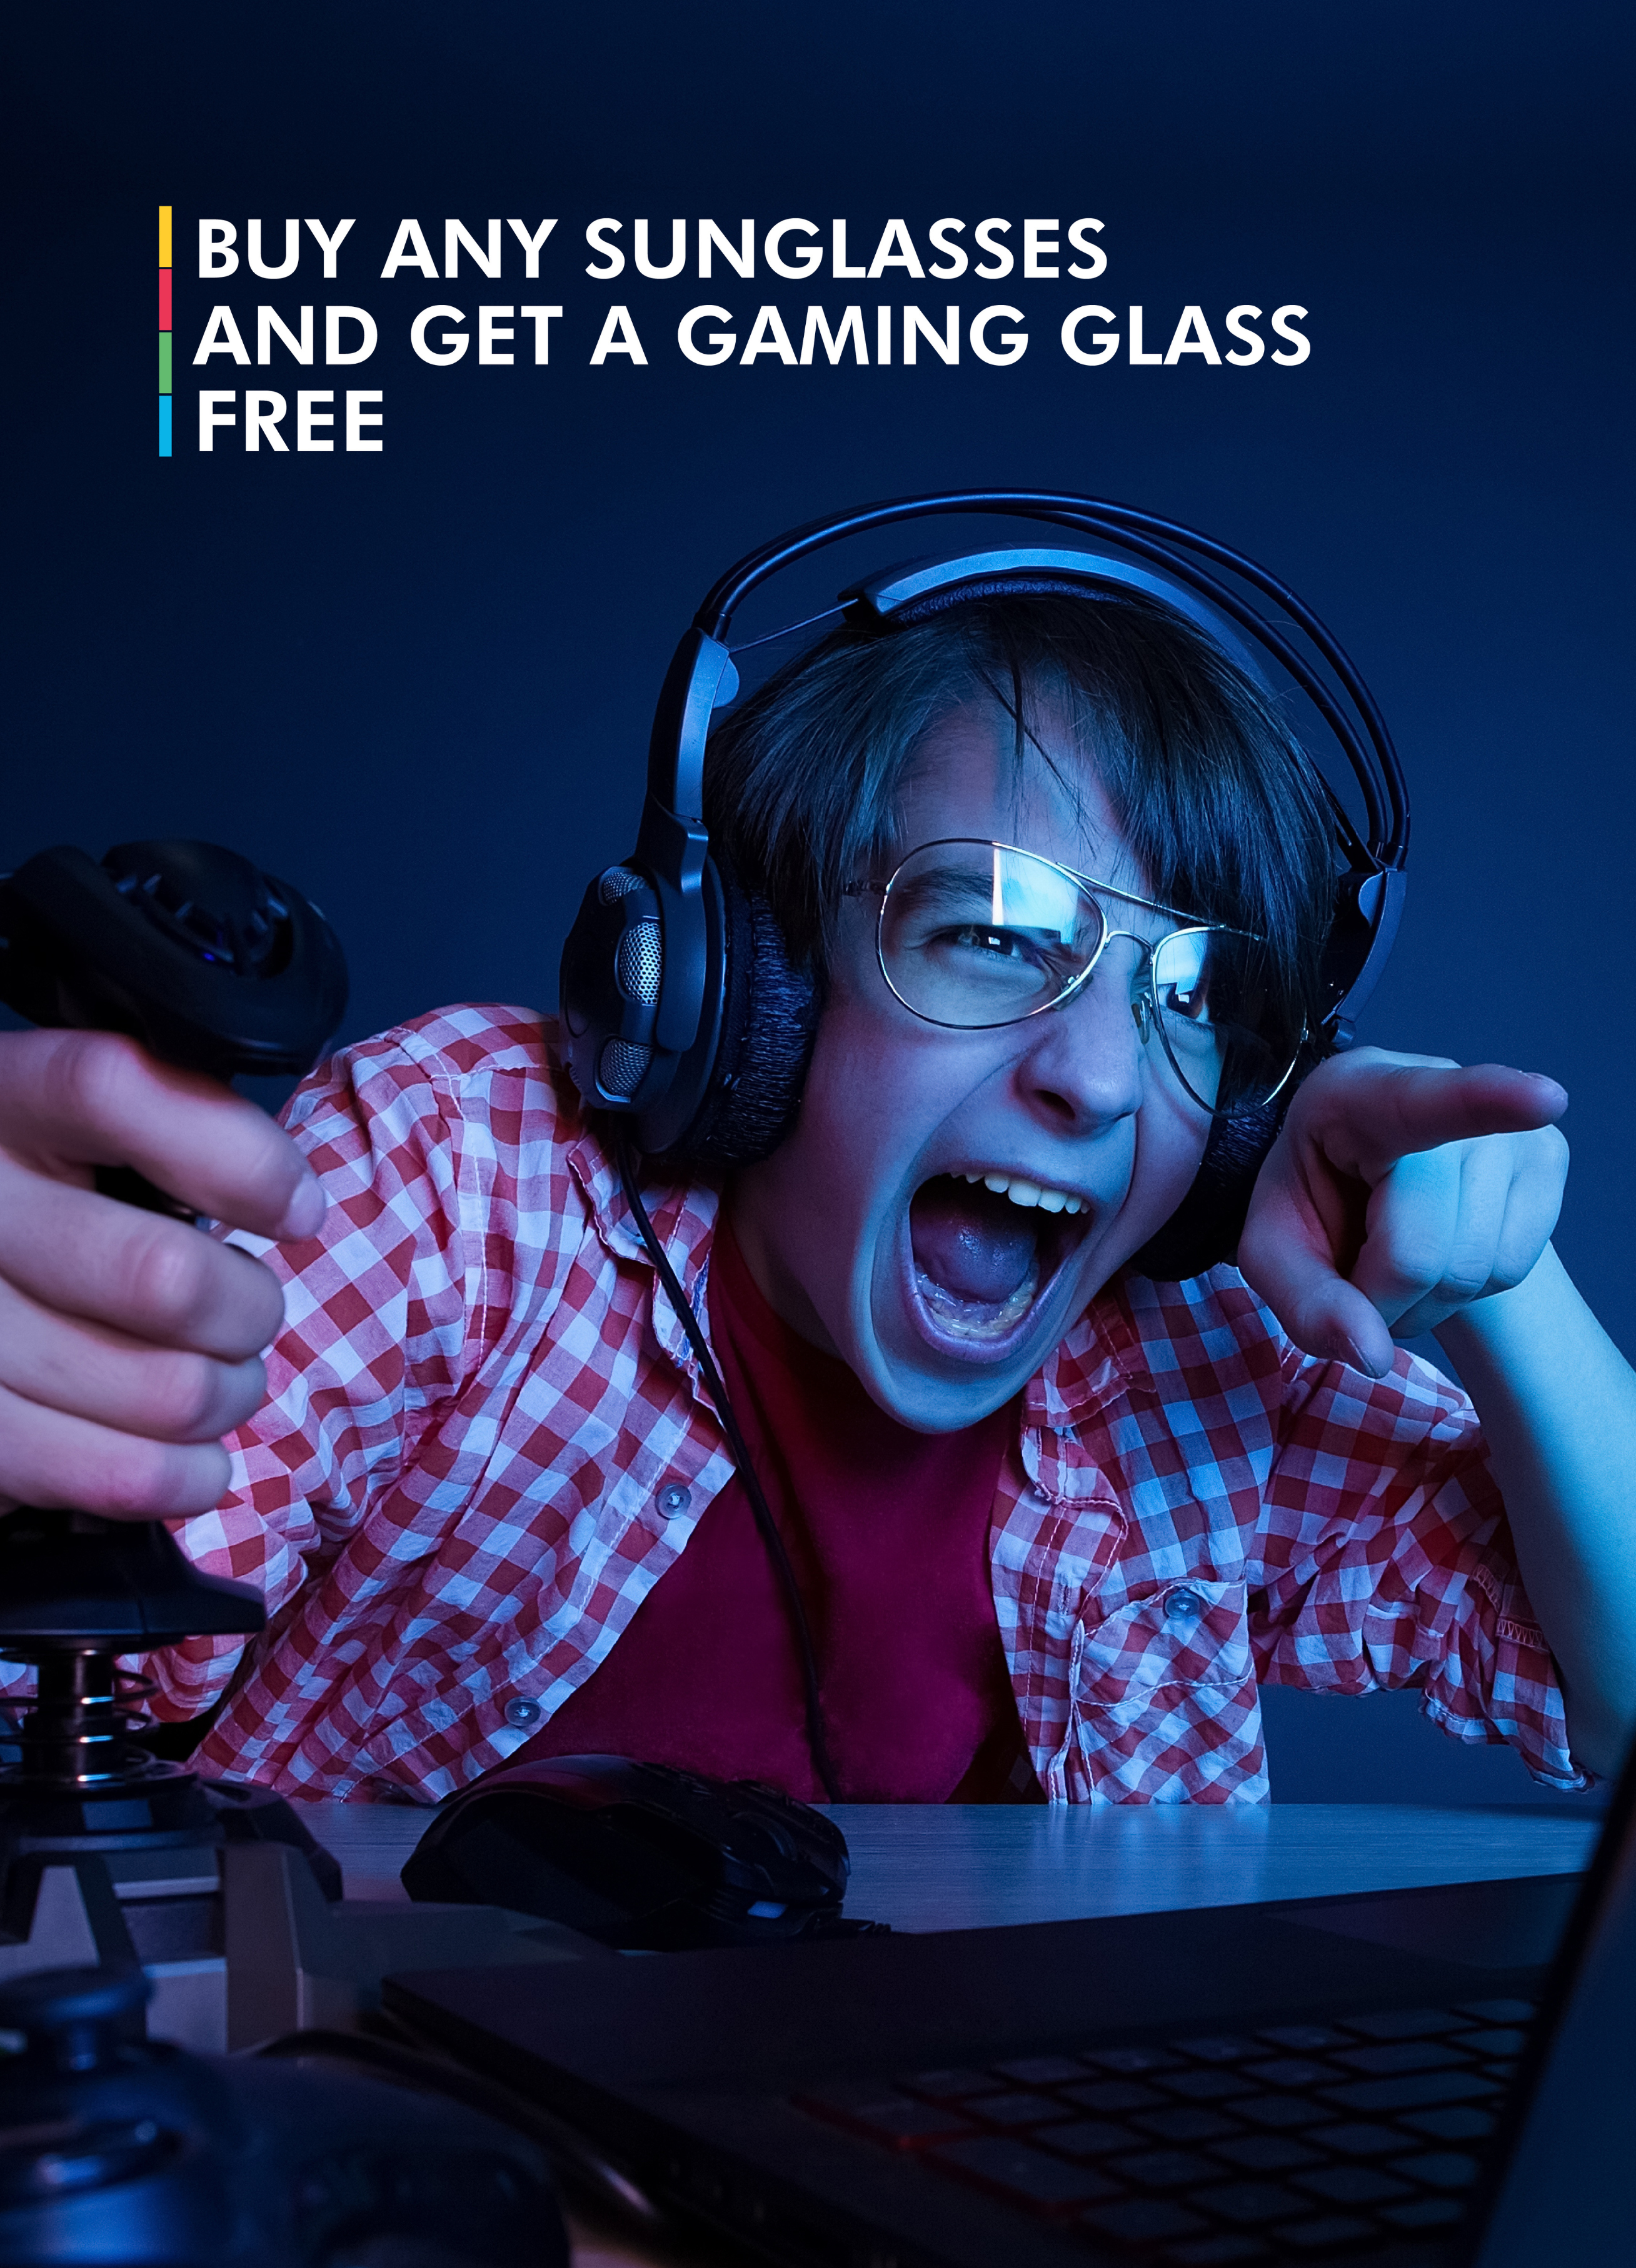 Gaming_Glass_2417x3629_bed2d55e-3025-49b3-852f-dad05d42780b.png